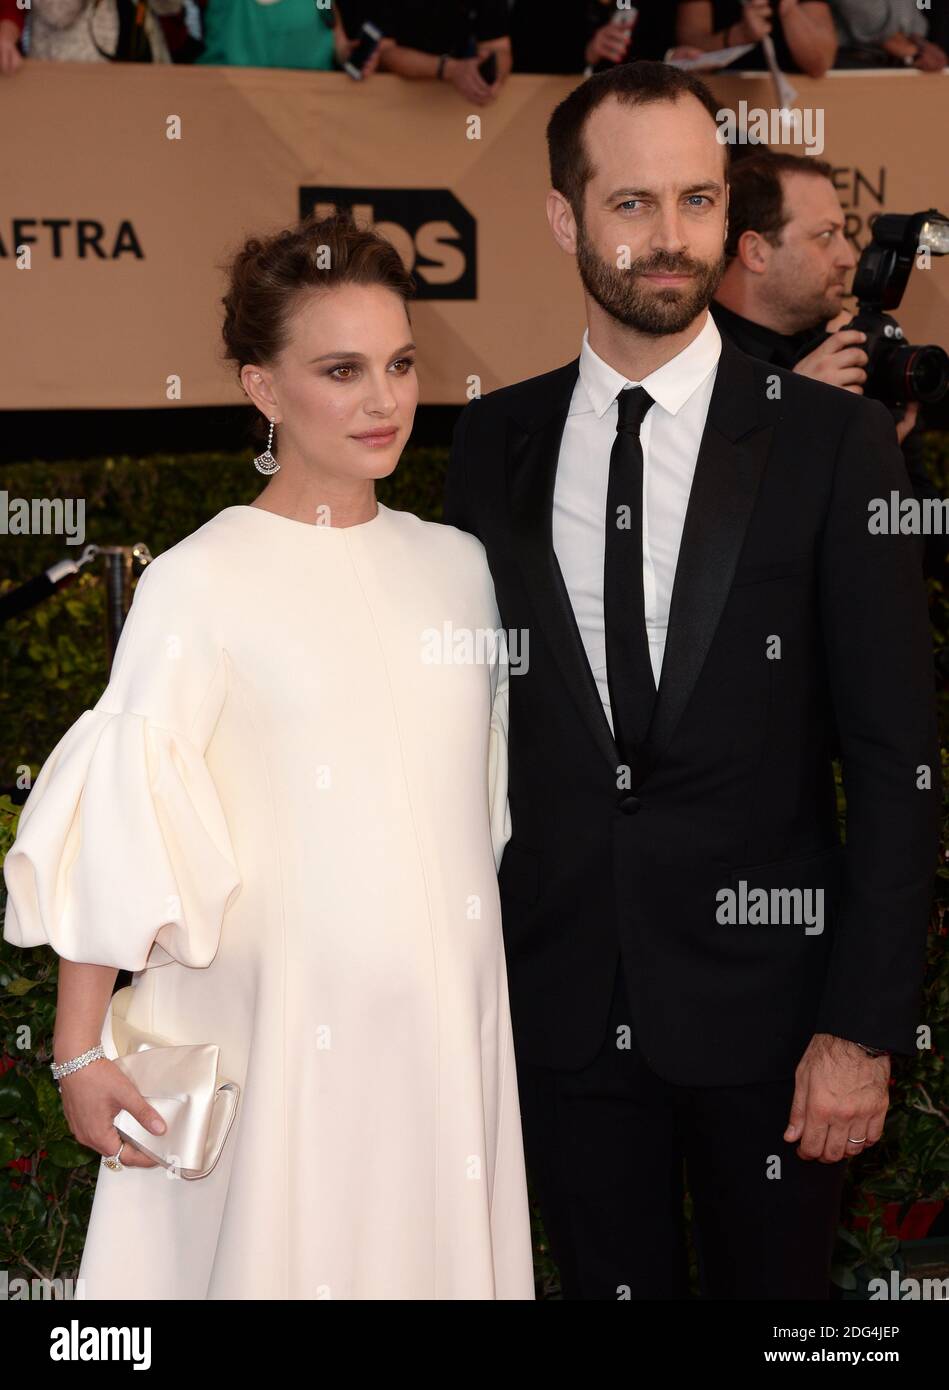 Natalie Portman and Benjamin Millepied attend the 23rd Annual Screen Actors Guild Awards held at the Shrine Auditorium in Los Angeles, CA, USA, on January 29, 2017. Photo by Lionel Hahn/ABACAPRESS.COM Stock Photo